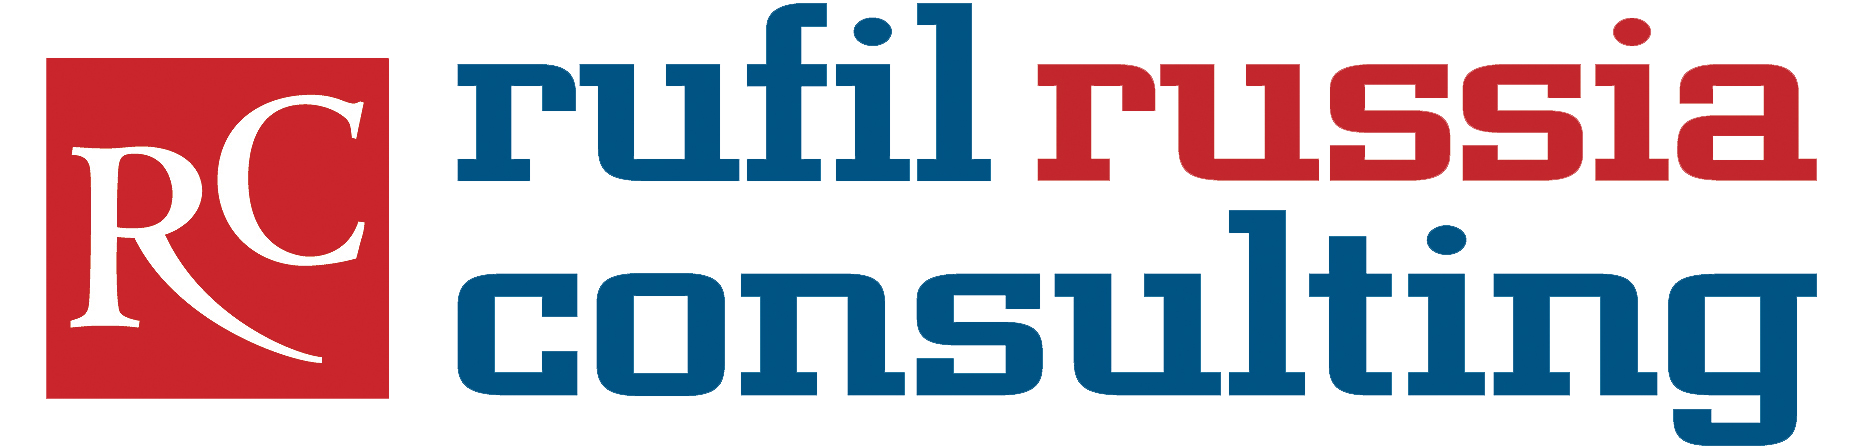 Rufil Russia Consulting | Legal, Tax and Accounting | DE